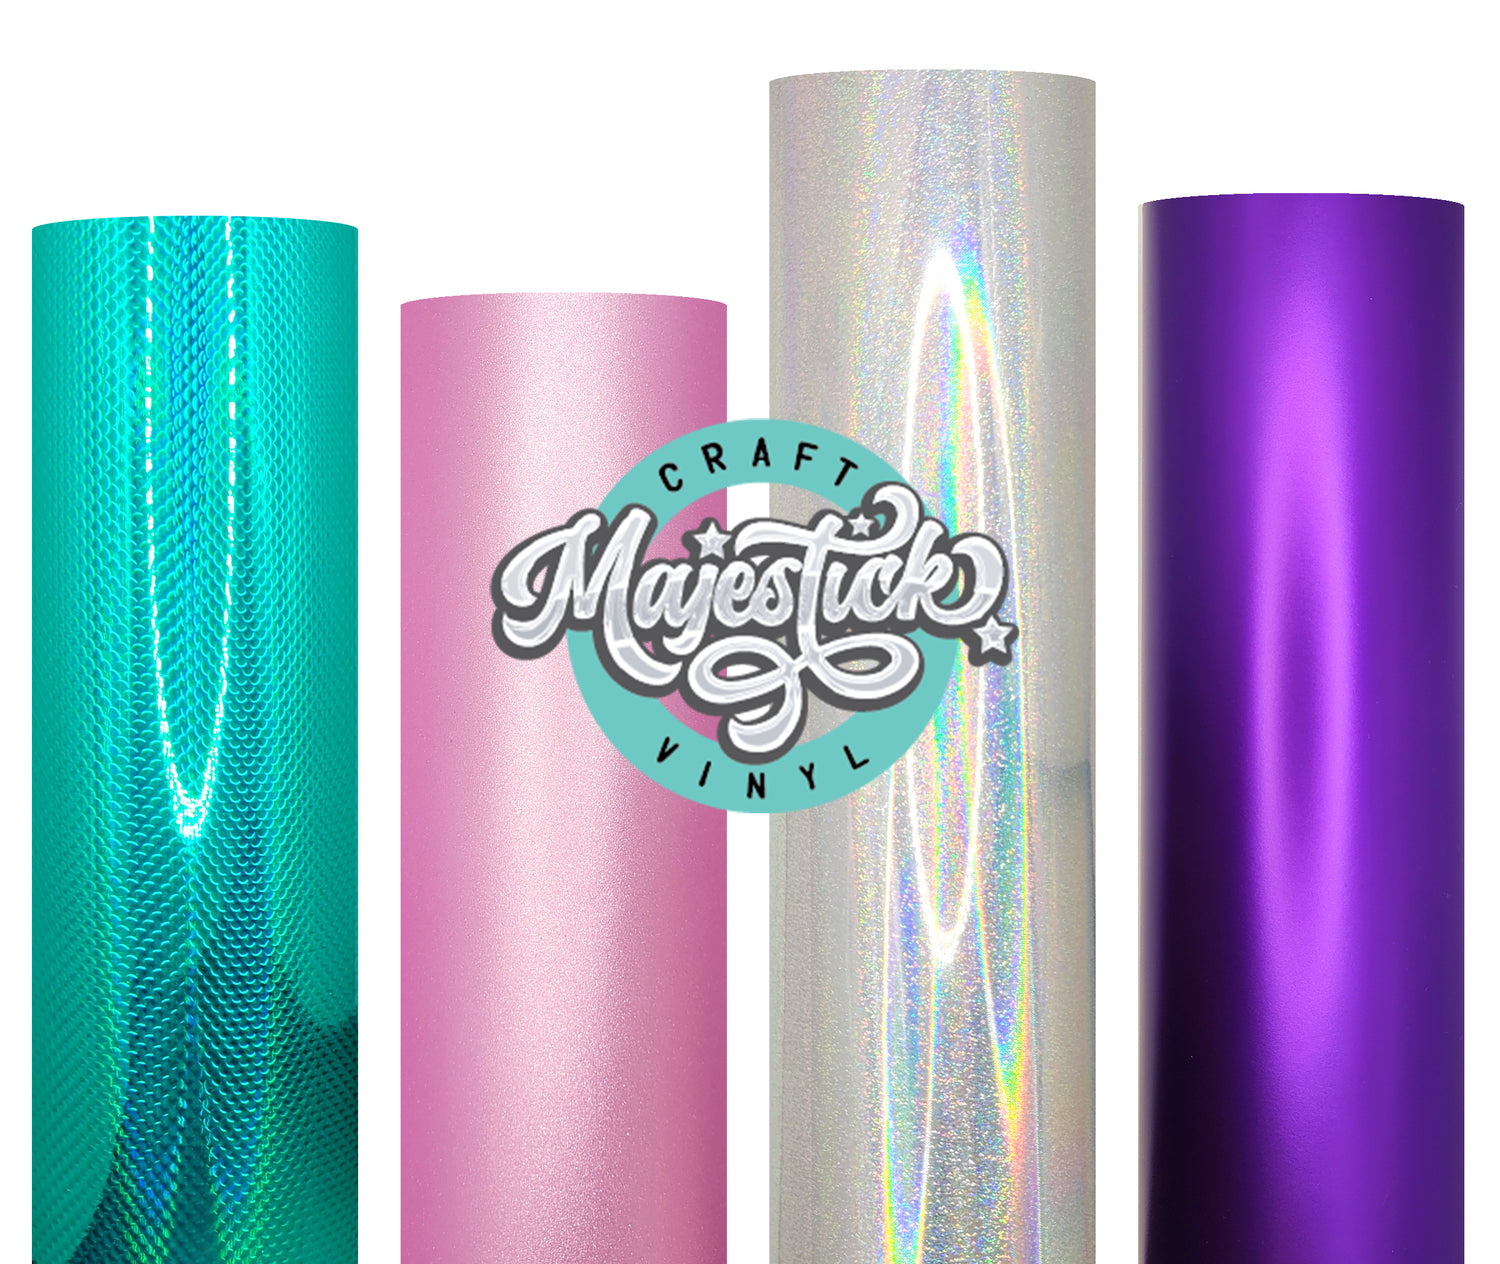 Majestick Craft Vinyl. Vibrant, holographic & sparkles. The ultimate collection.